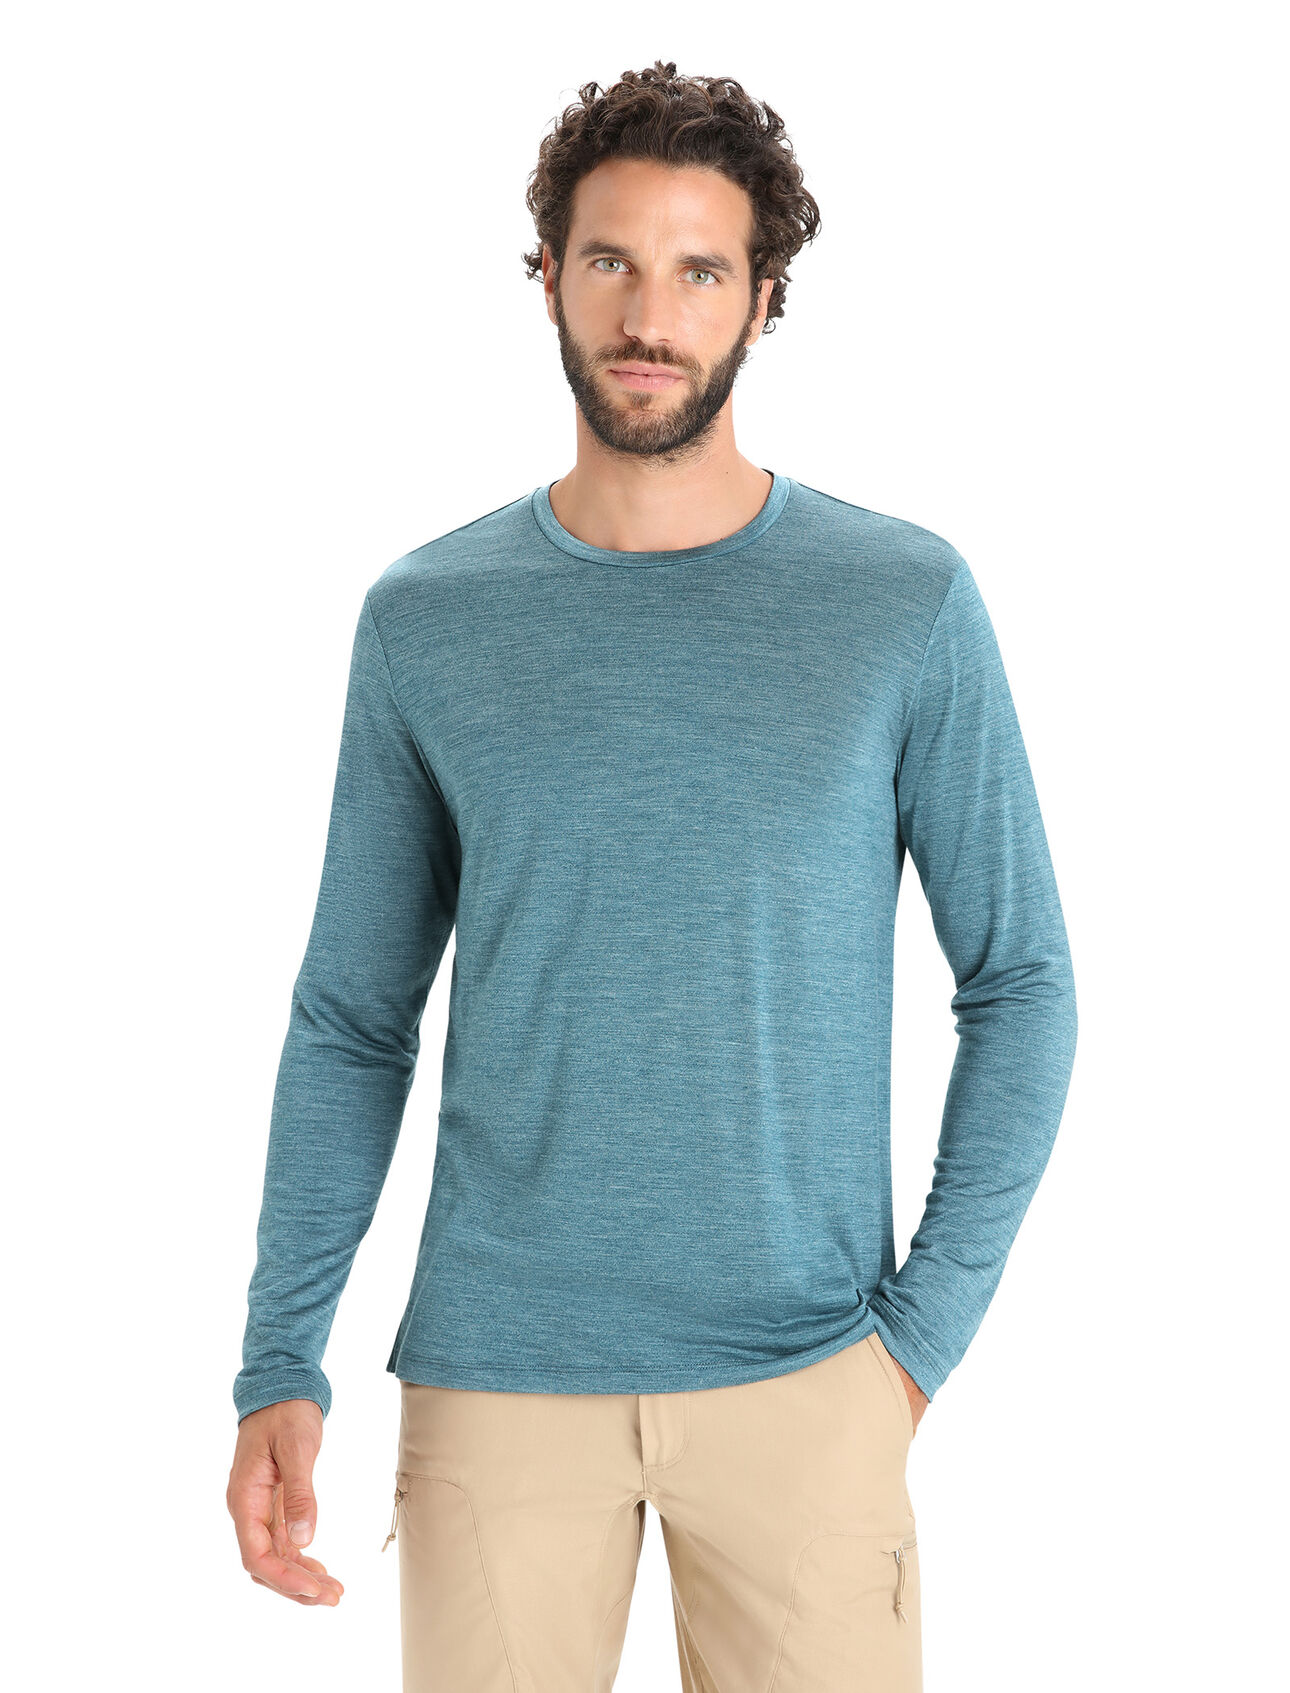 Mens Merino Sphere II Long Sleeve T-Shirt A soft merino-blend tee made with our lightweight Cool-Lite™ jersey fabric, the Sphere II Long Sleeve Tee provides natural breathability, odor resistance and comfort.